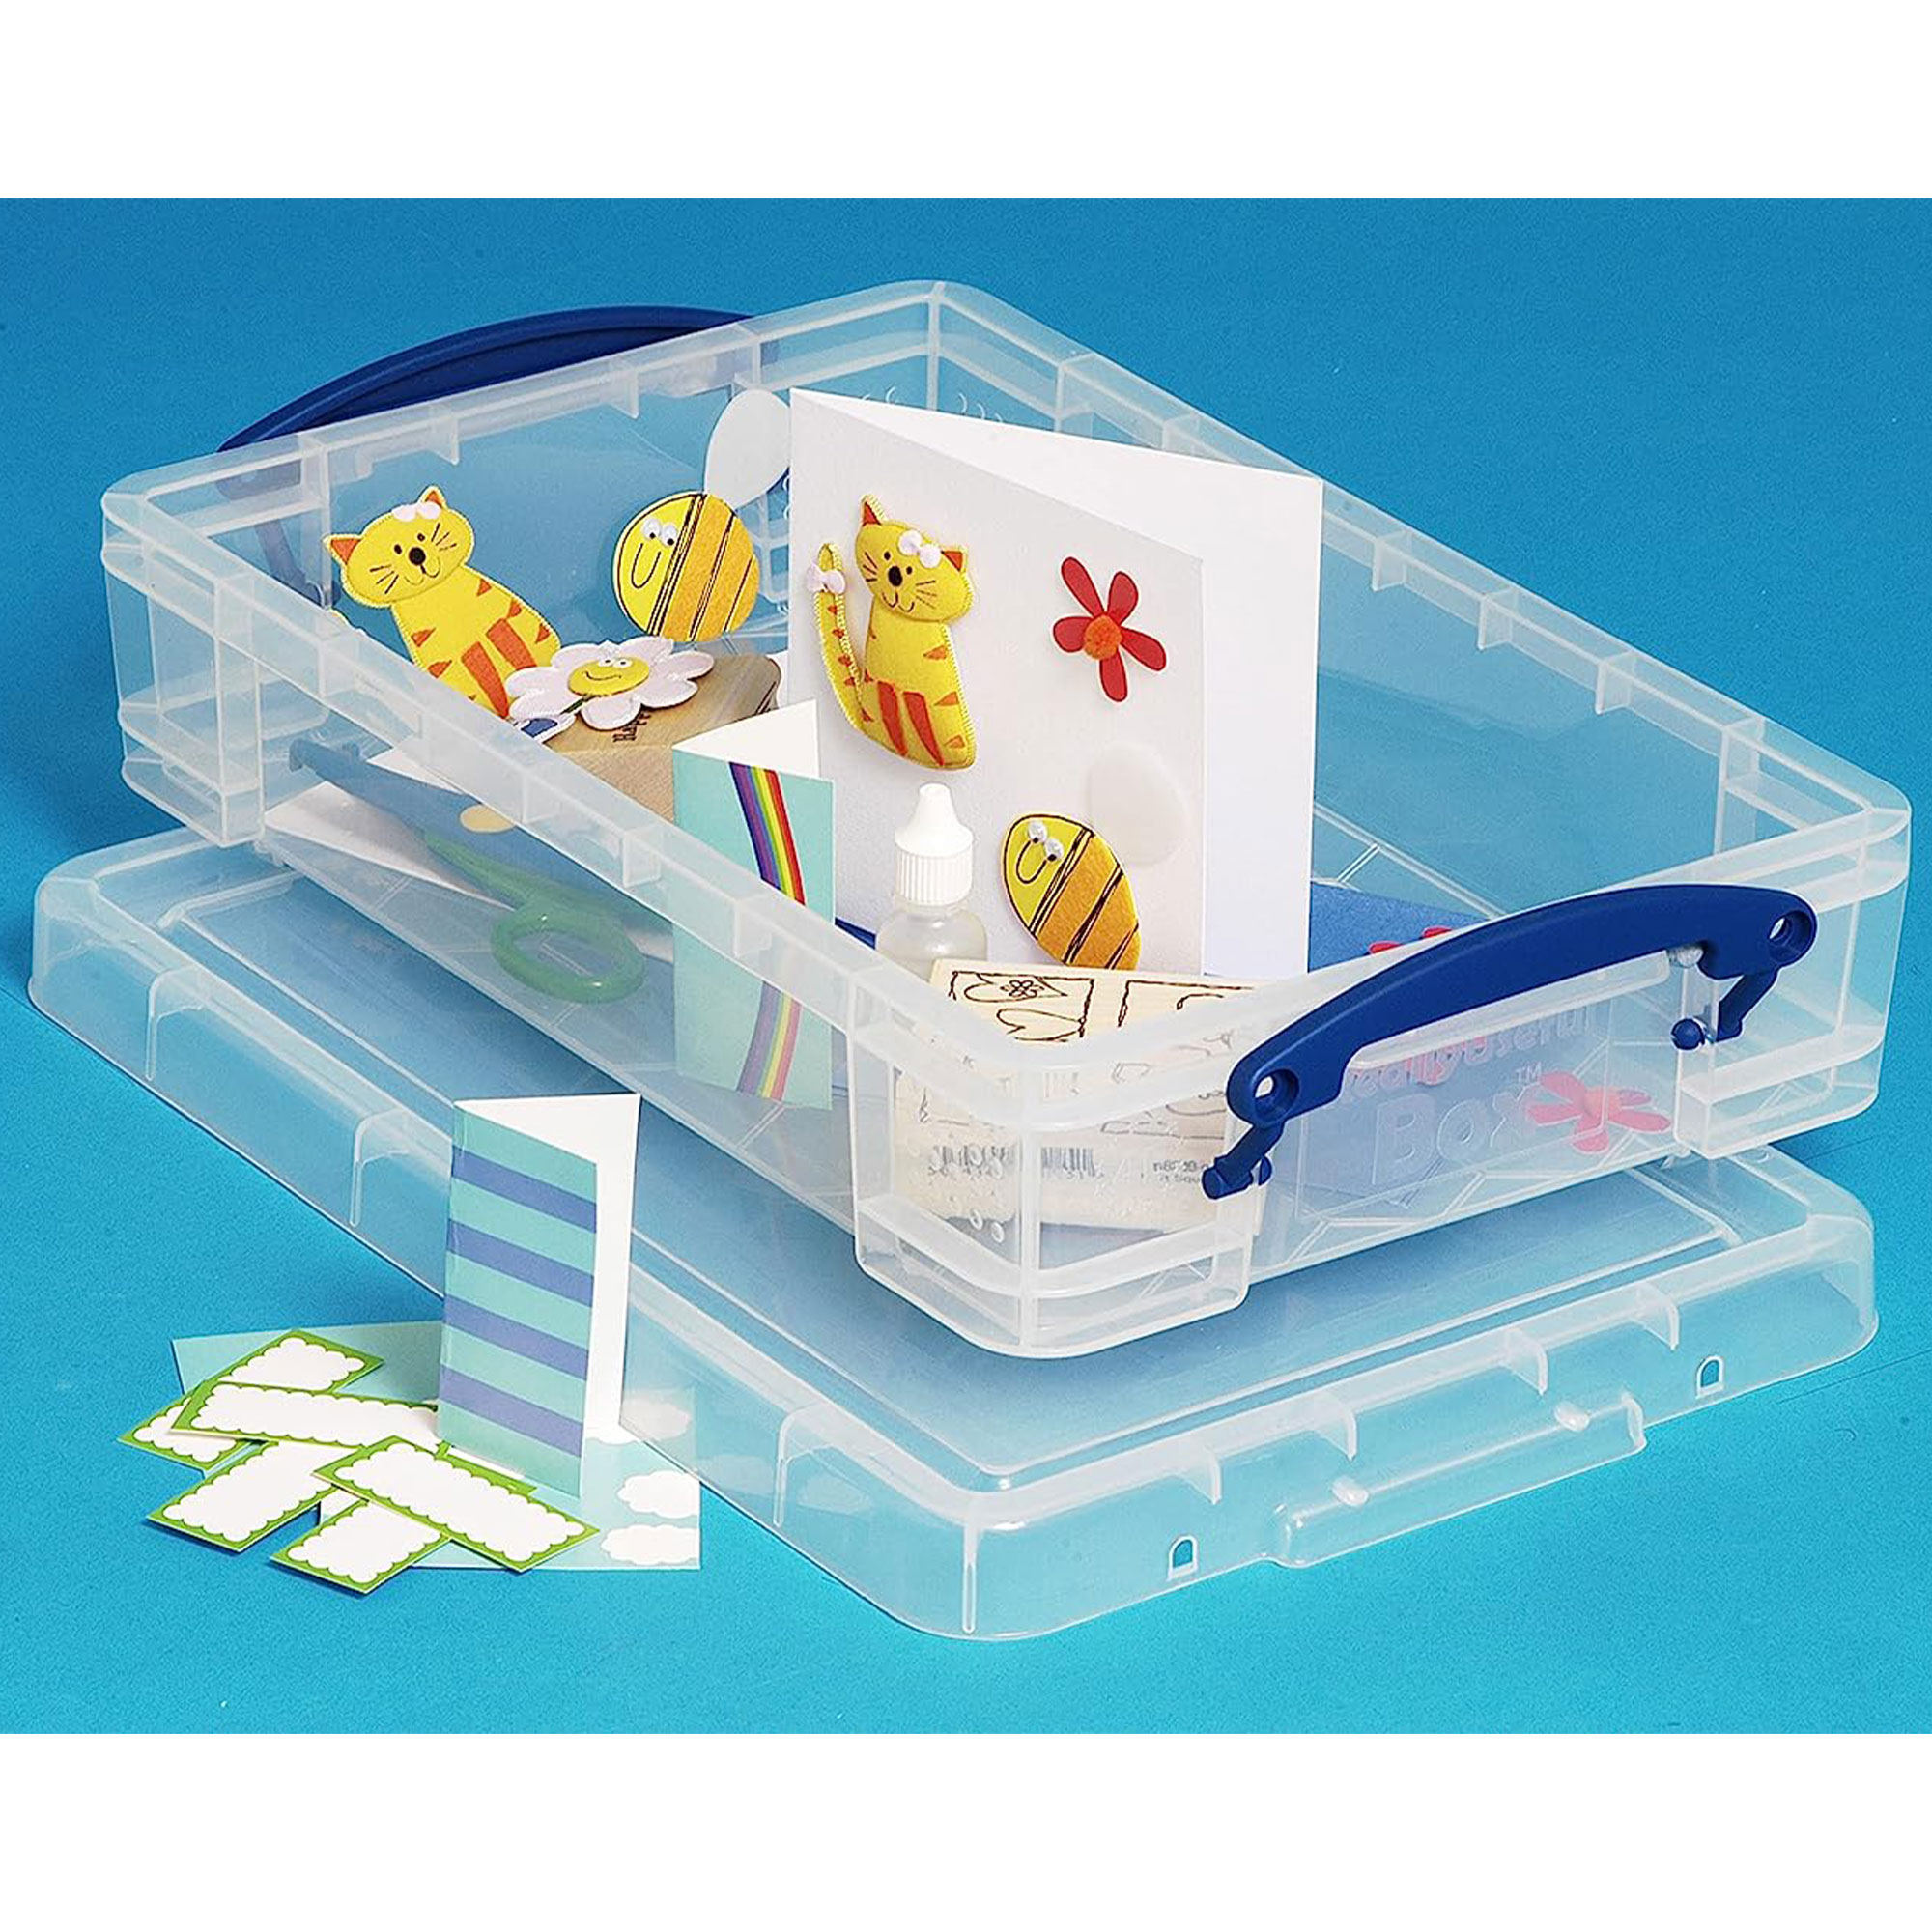 Really Useful Box 4L Box with Snap Down Handles, Clear